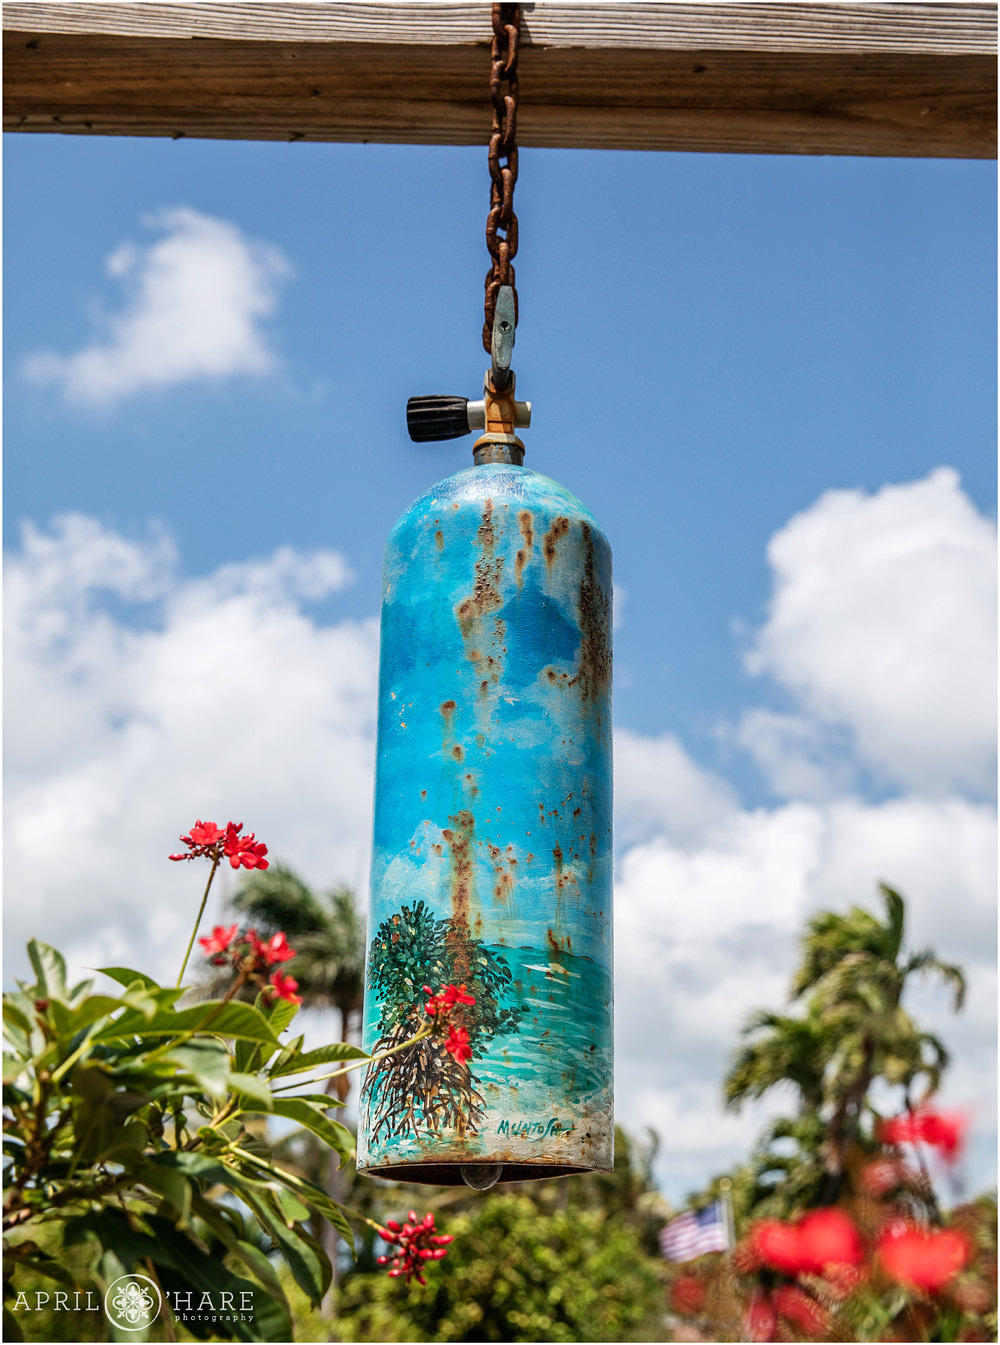 Neat old painted scuba diving tank turned into a chime